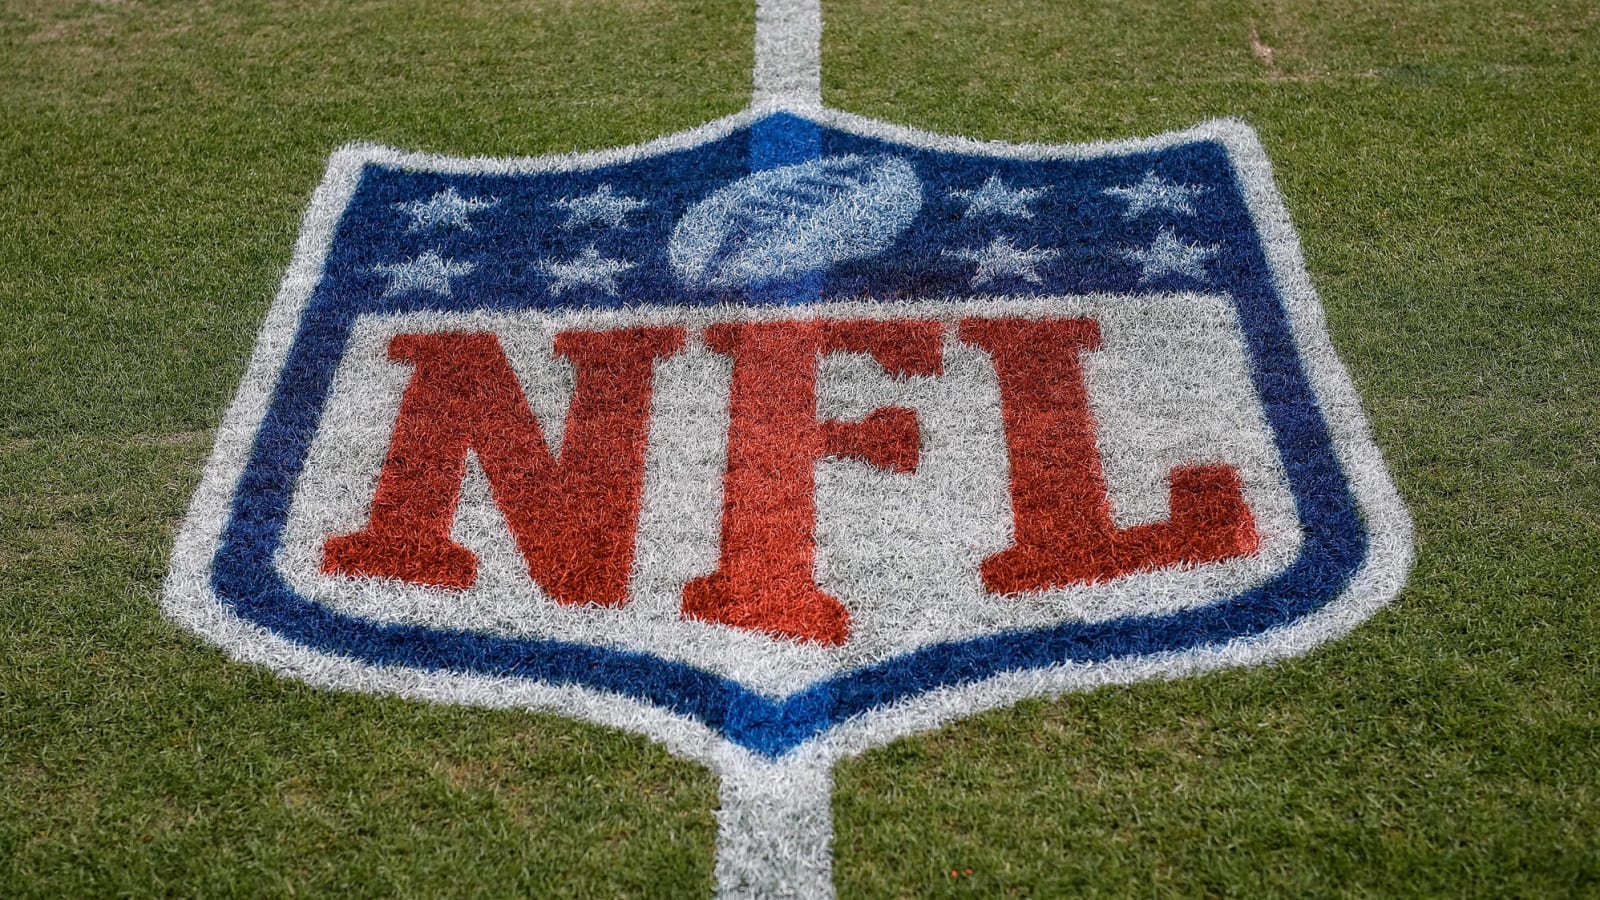 The NFL's Next Ad Revenue Goldmine Could Be Jersey Patches